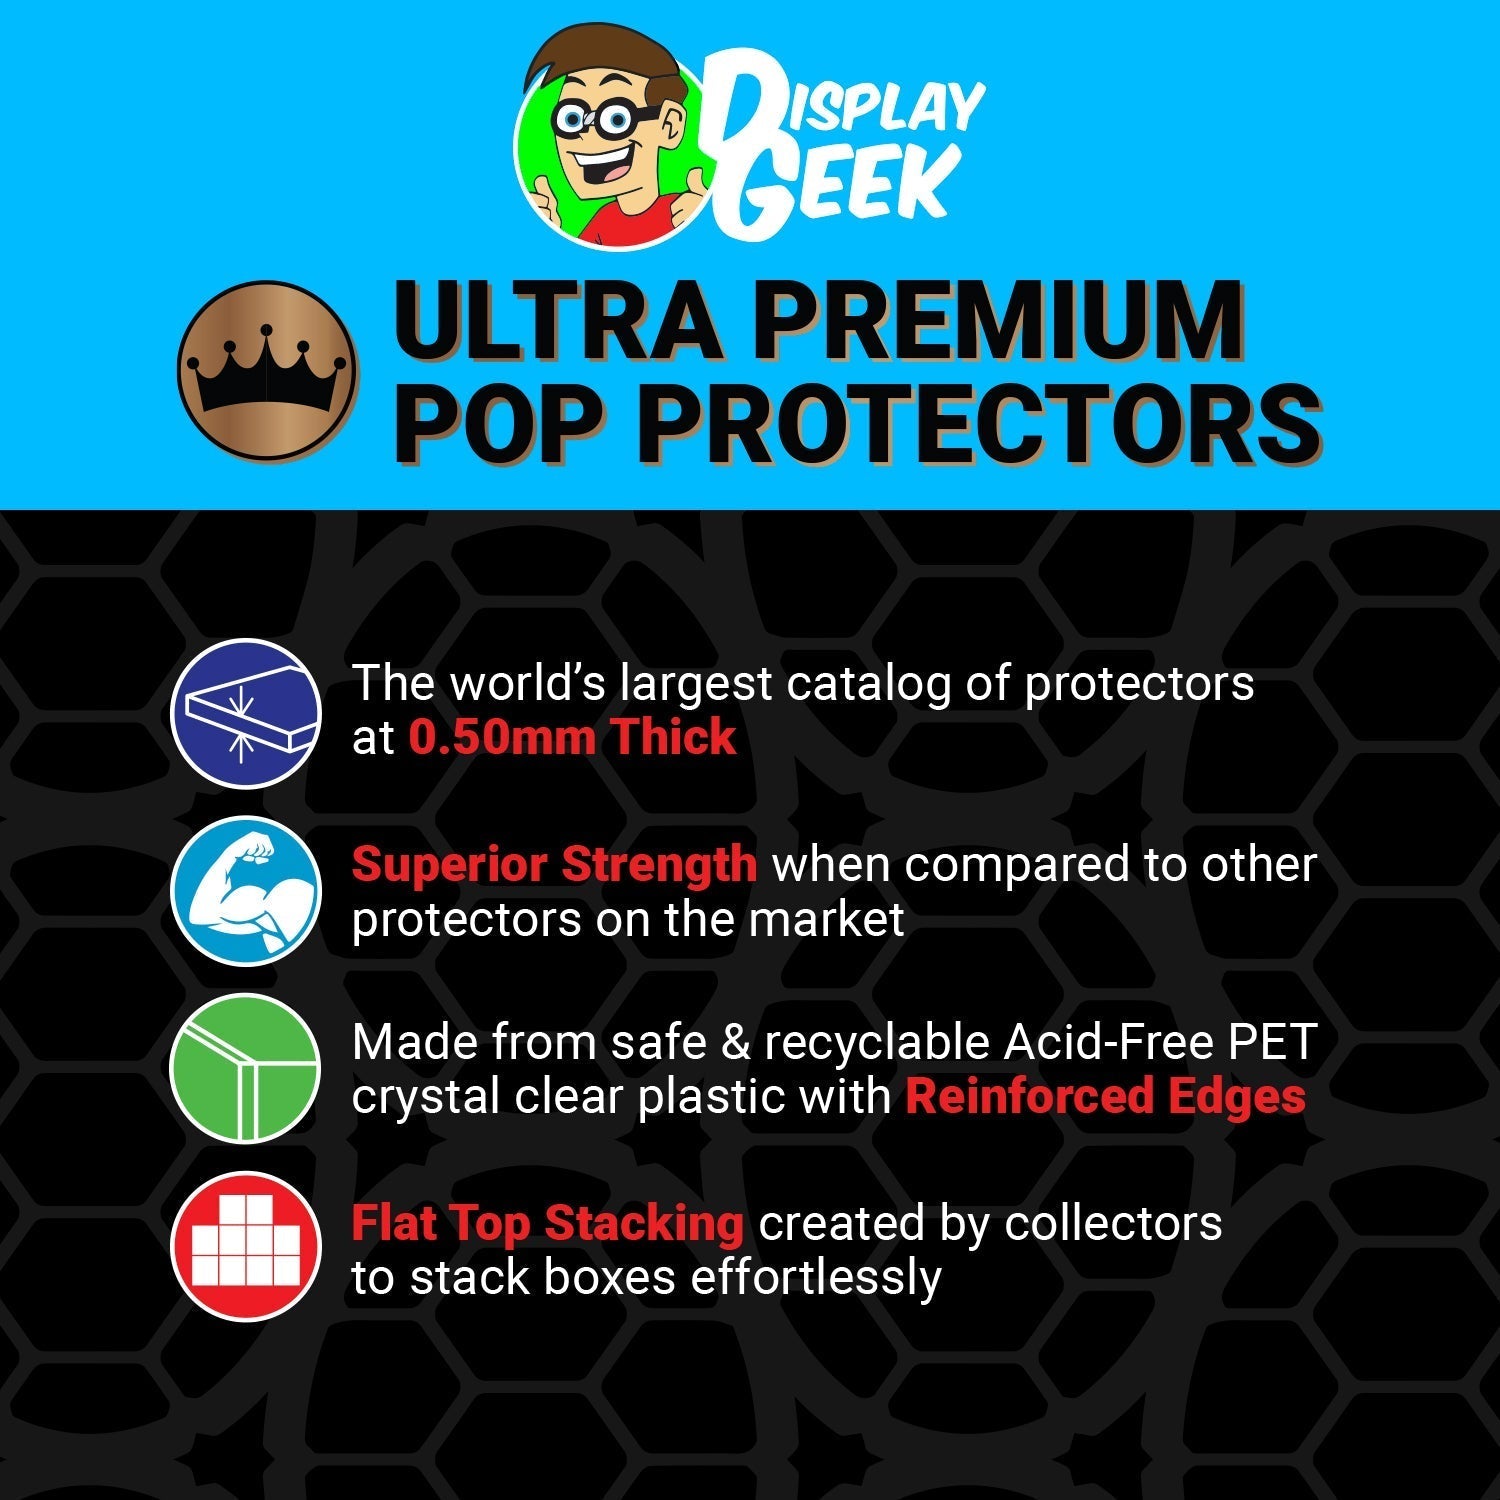 Pop Protector for Elf #03 Funko Pop Moment Deluxe - PPG Pop Protector Guide Search Created by Display Geek